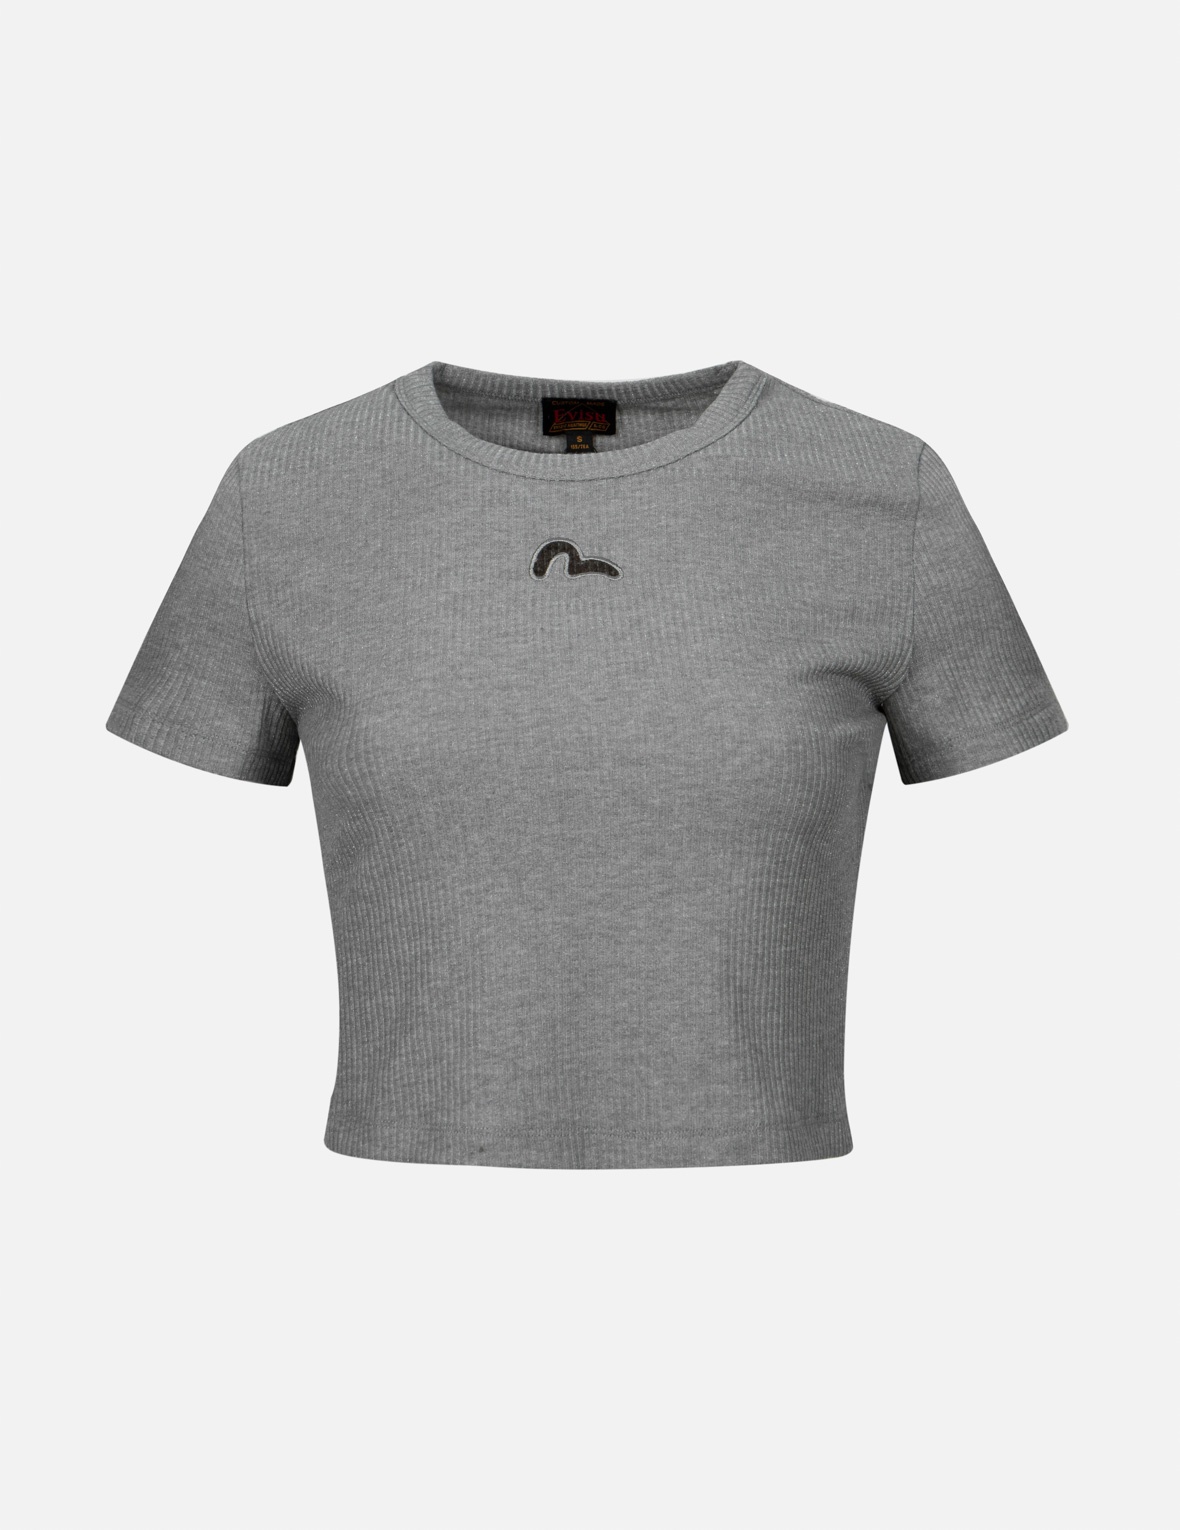 CUT-OUT SEAGULL SLIM FIT T-SHIRT - 1